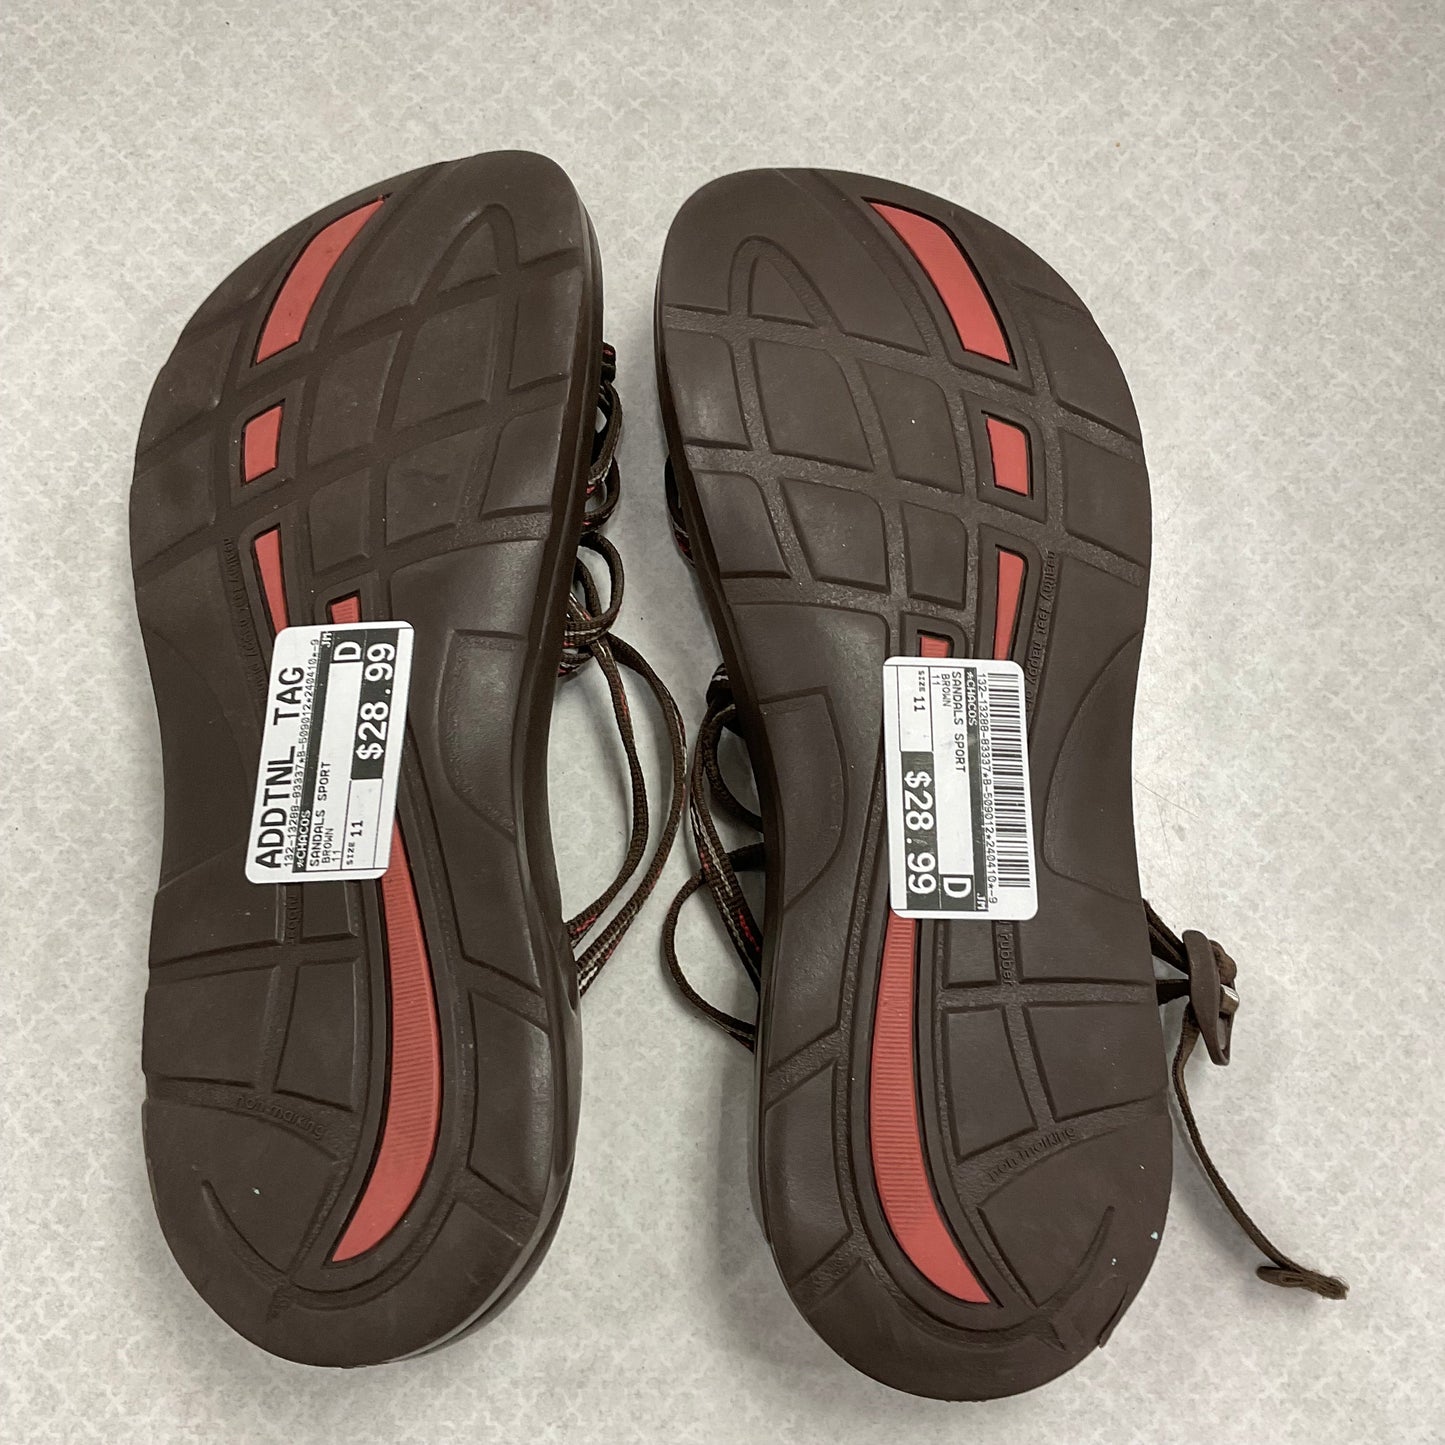 Sandals Sport By Chacos  Size: 11